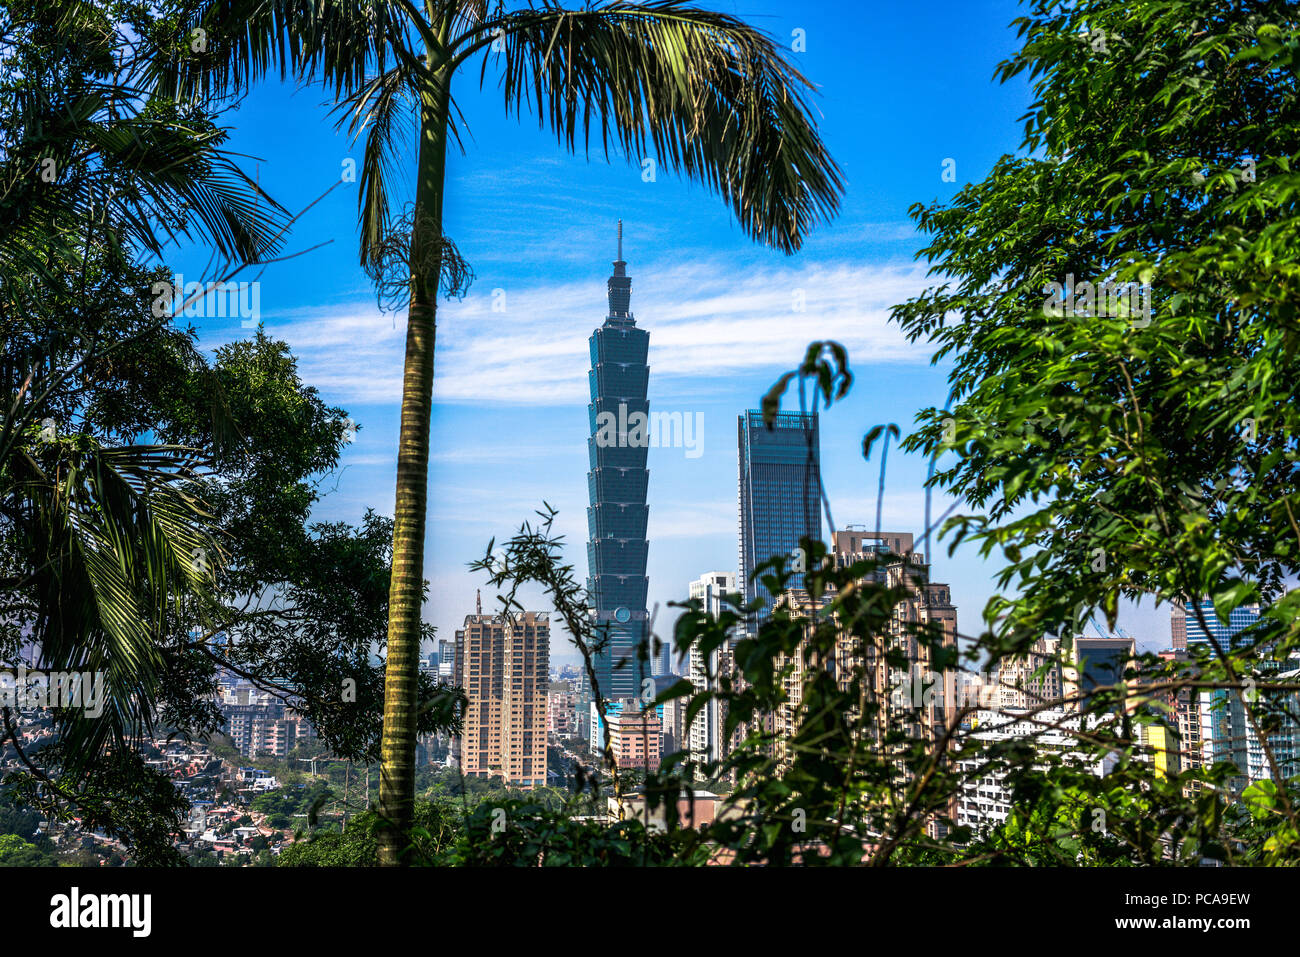 Taipei city skyline buildings in middle of nature viewed from Elephant mountain in Taiwan Stock Photo